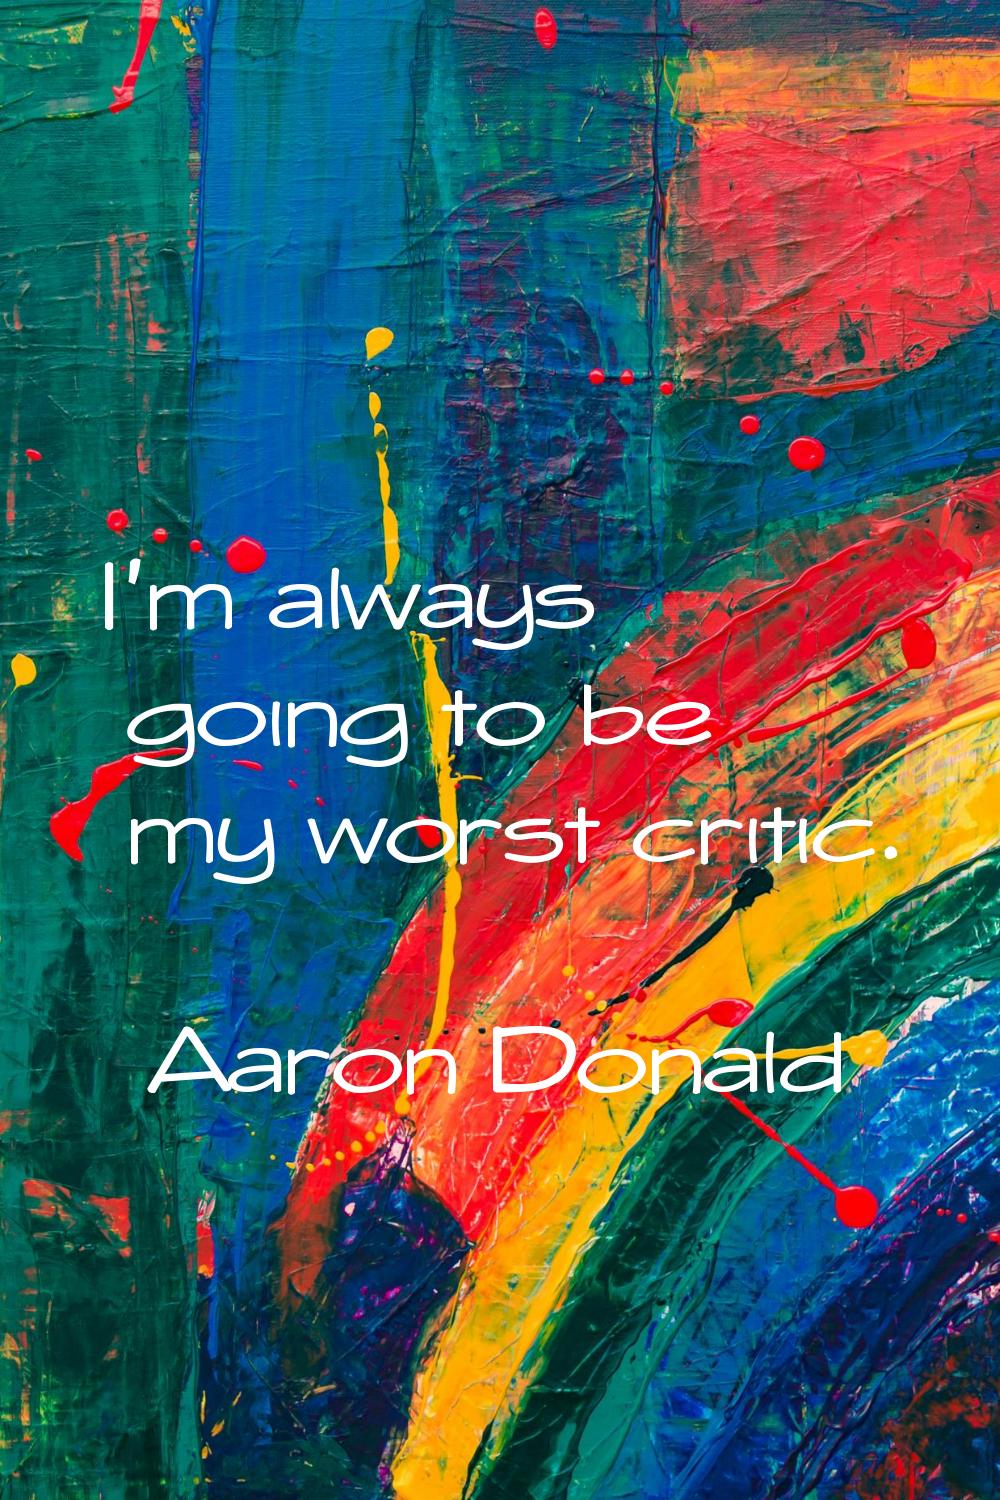 I'm always going to be my worst critic.